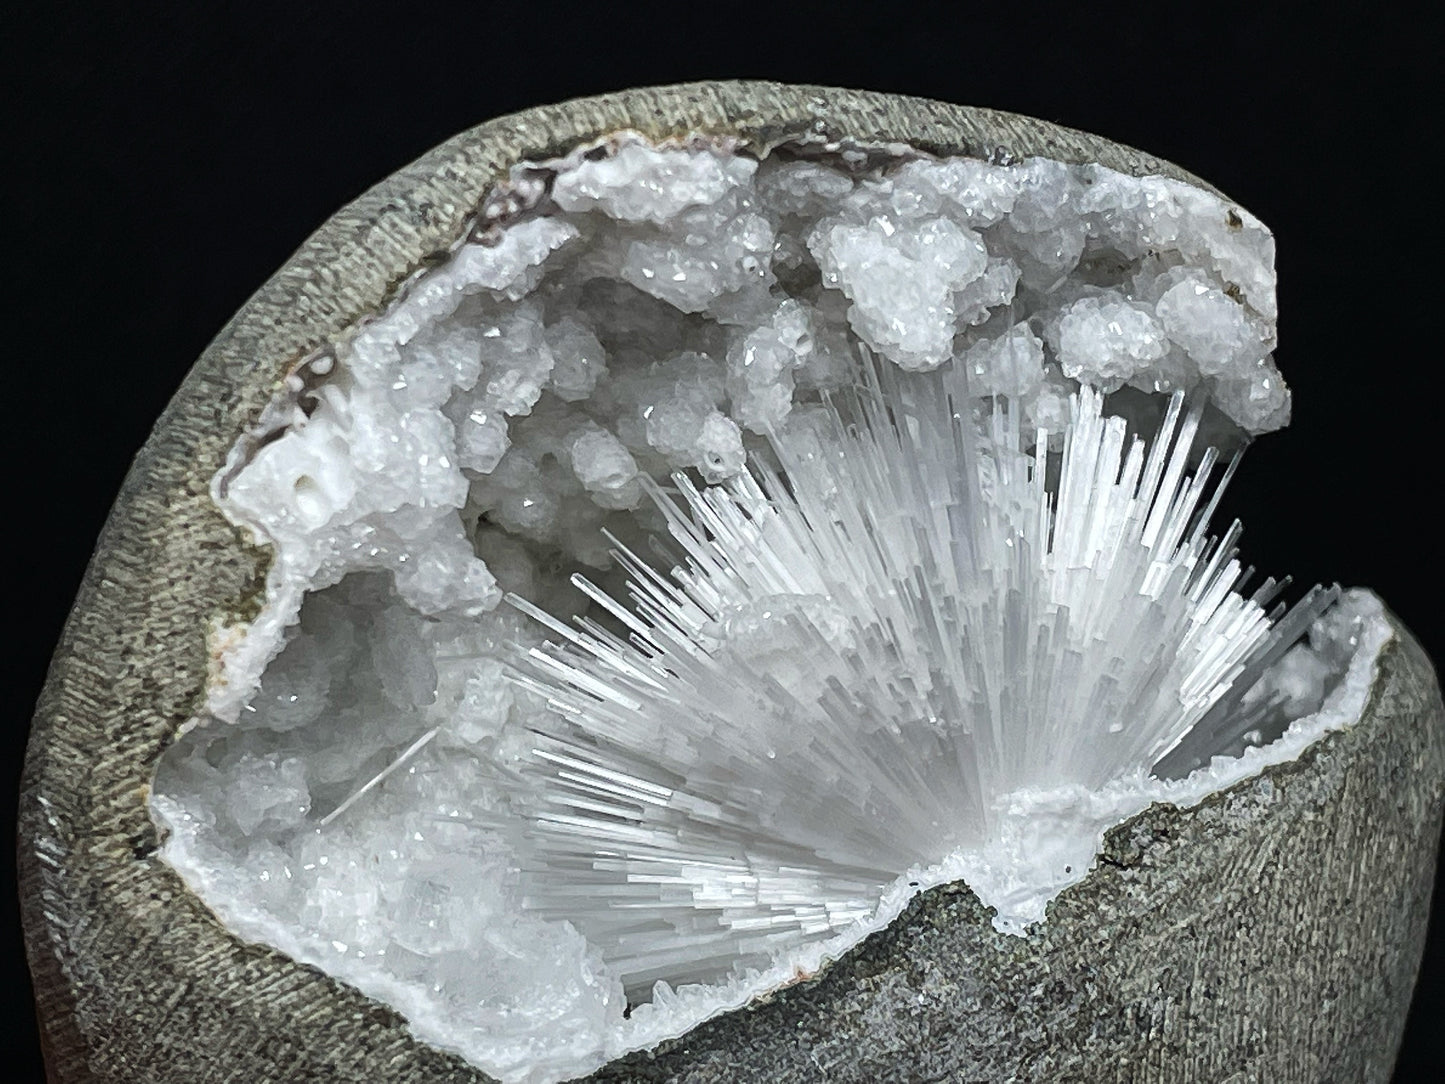 Delicate Scolecite And Chalcedony Geode From India Collectors Specimen From Aurangabad, Maharashtra, India